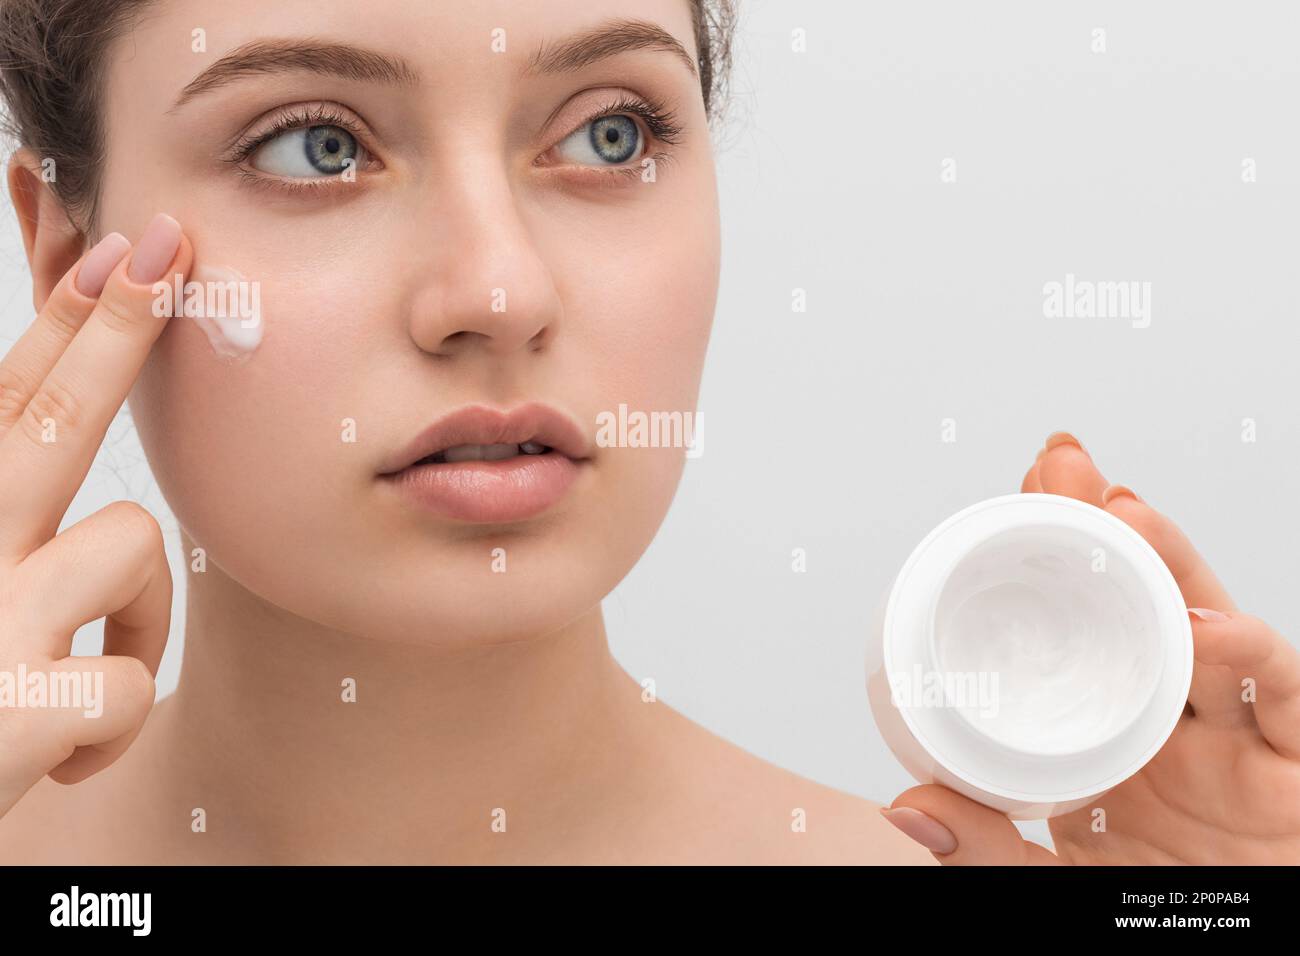 Young beautiful girl applies cream to her face, close-up. Long hair, big blue eyes and clear skin. Stock Photo